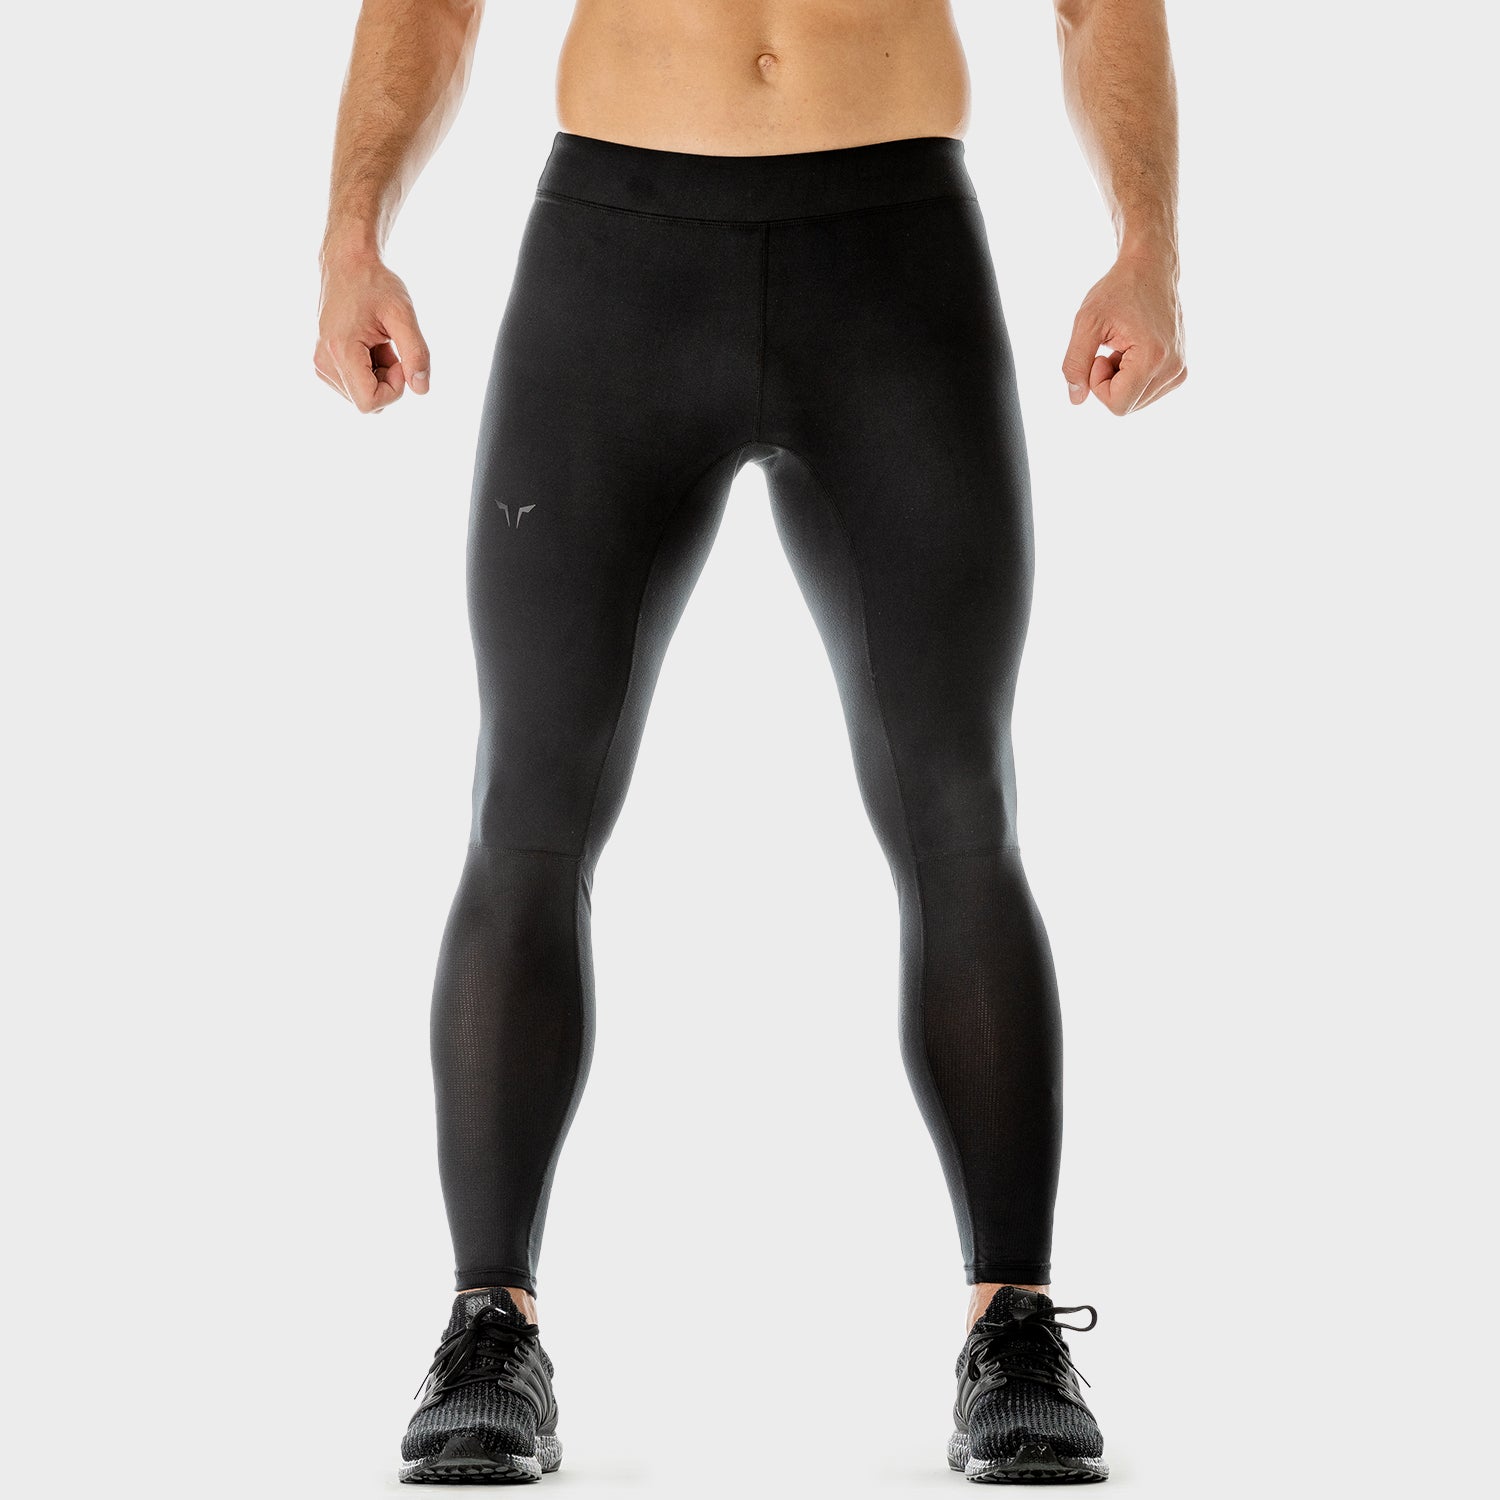 squatwolf-gym-leggings-for-men-lab-360-performance-tights-black-workout-clothes